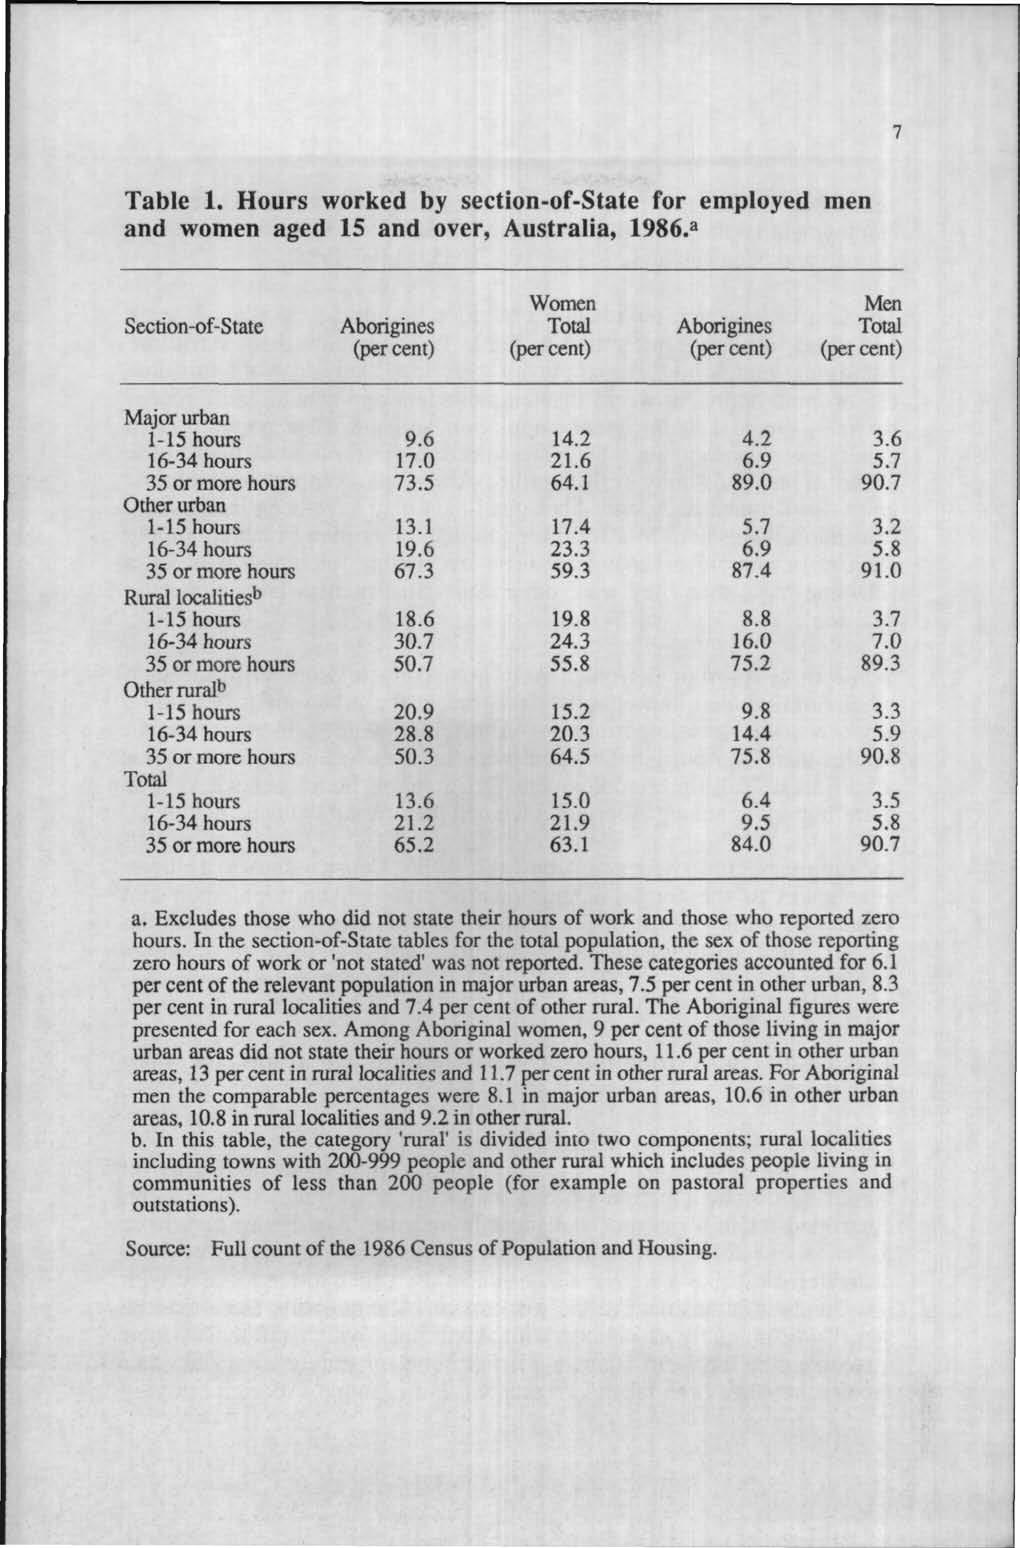 Table 1. Hours worked by section-of-state for employed men and women aged 15 and over, Australia, 1986.